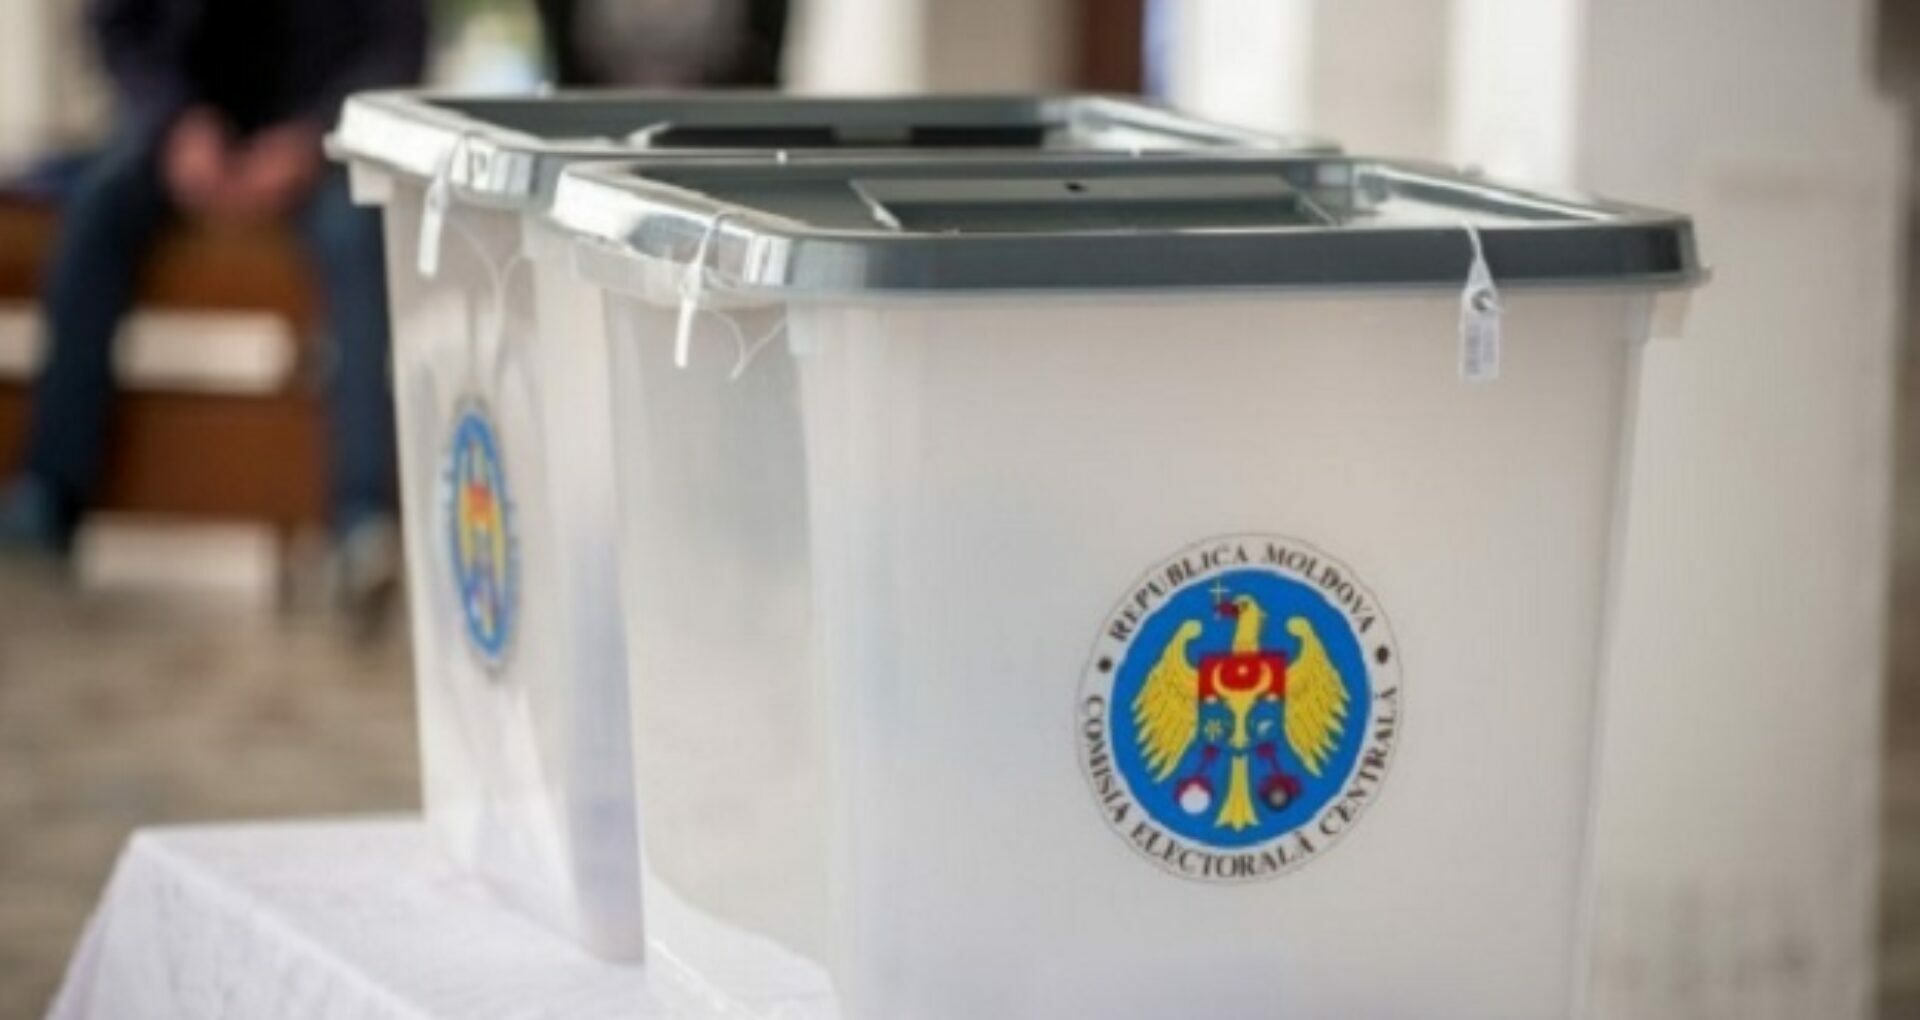 September Opens Up The Arena For The Moldovan Presidential Elections 2020